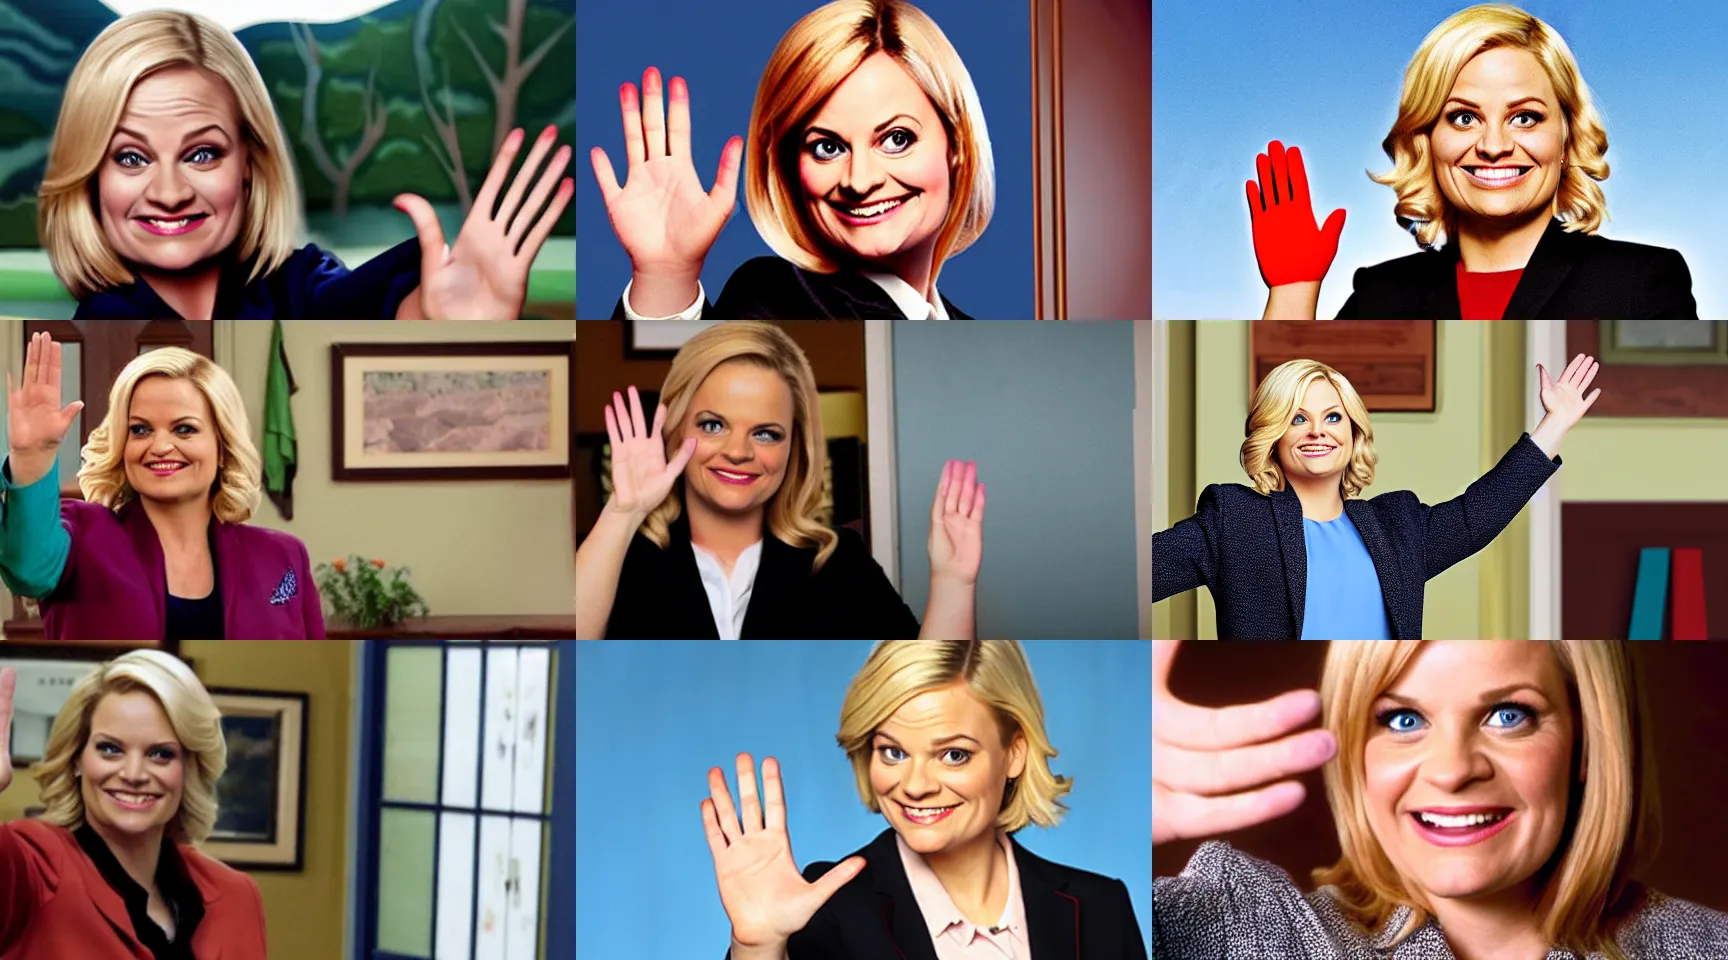 Prompt: leslie knope from the tv show parks and recreation waving goodbye